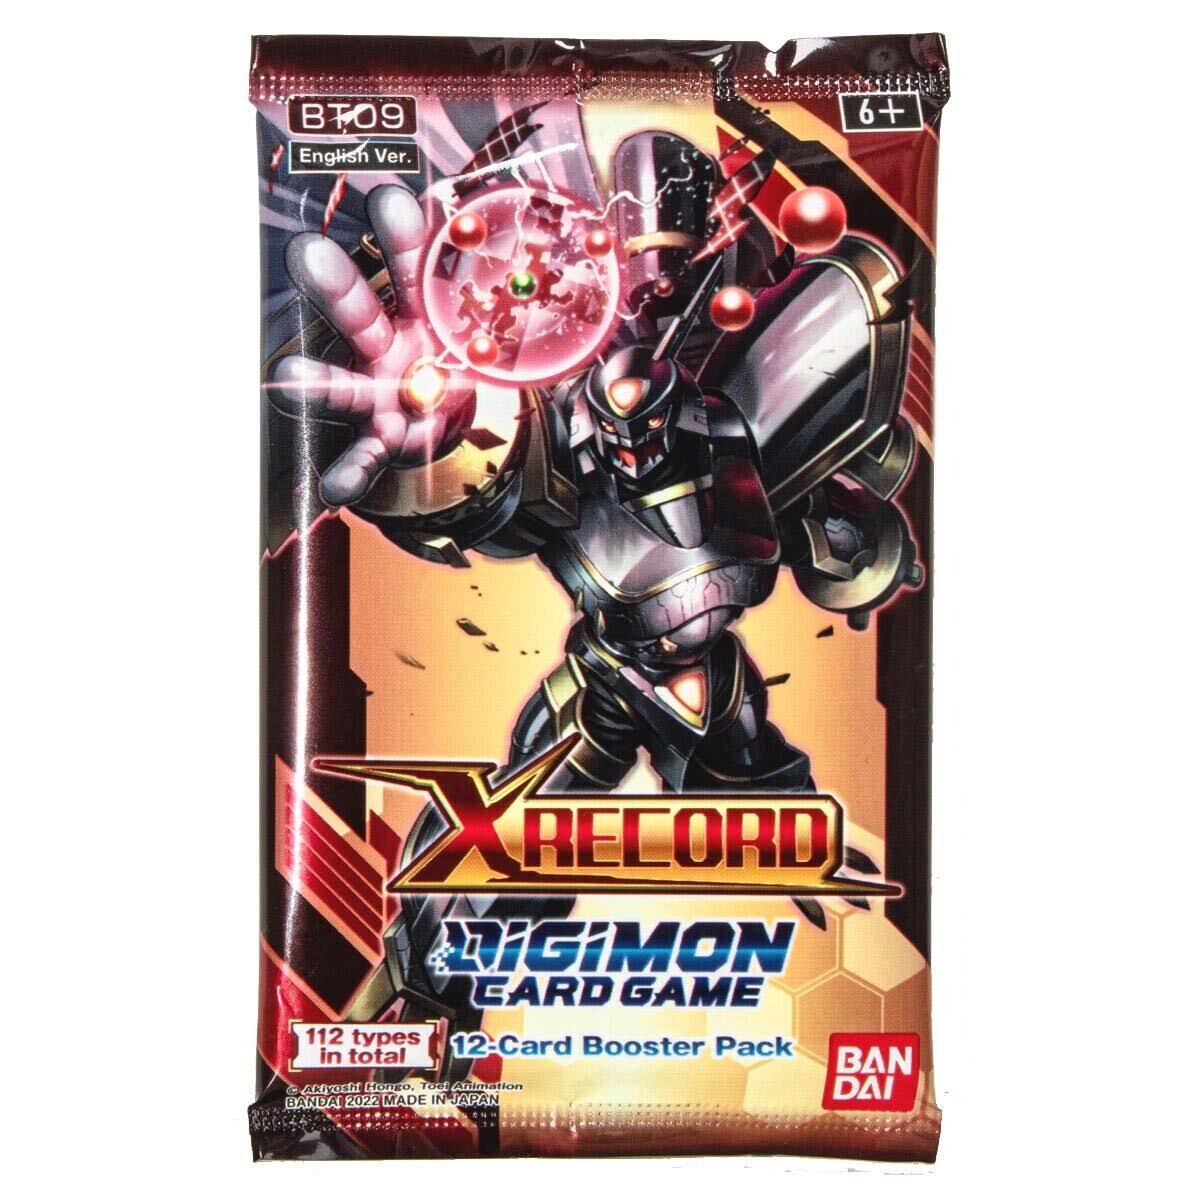 Digimon Card Game Series 09 - x Record BT09 Booster Pack